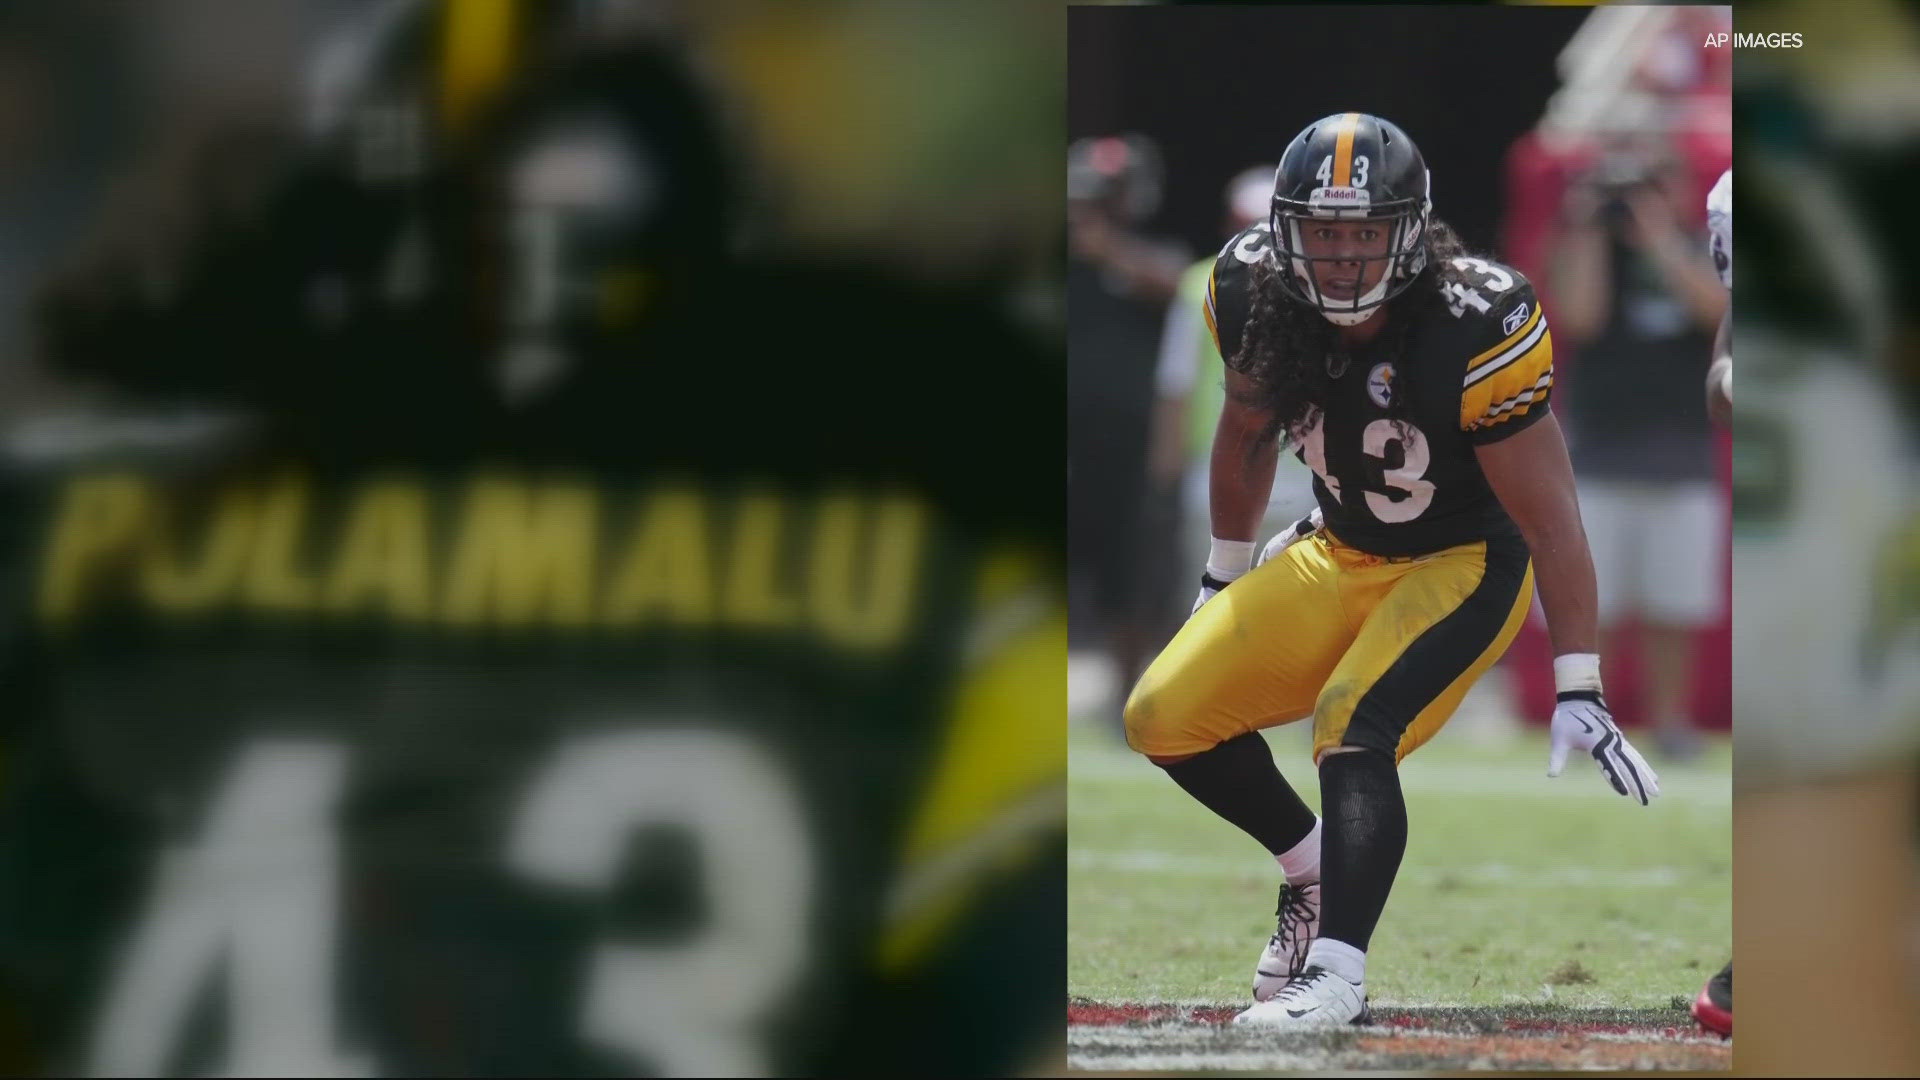 Many legendary defensive players have suited up for the Pittsburgh Steelers, and Polamalu is one of the best: Hall of Famer and 2-time Super Bowl champ, to start.